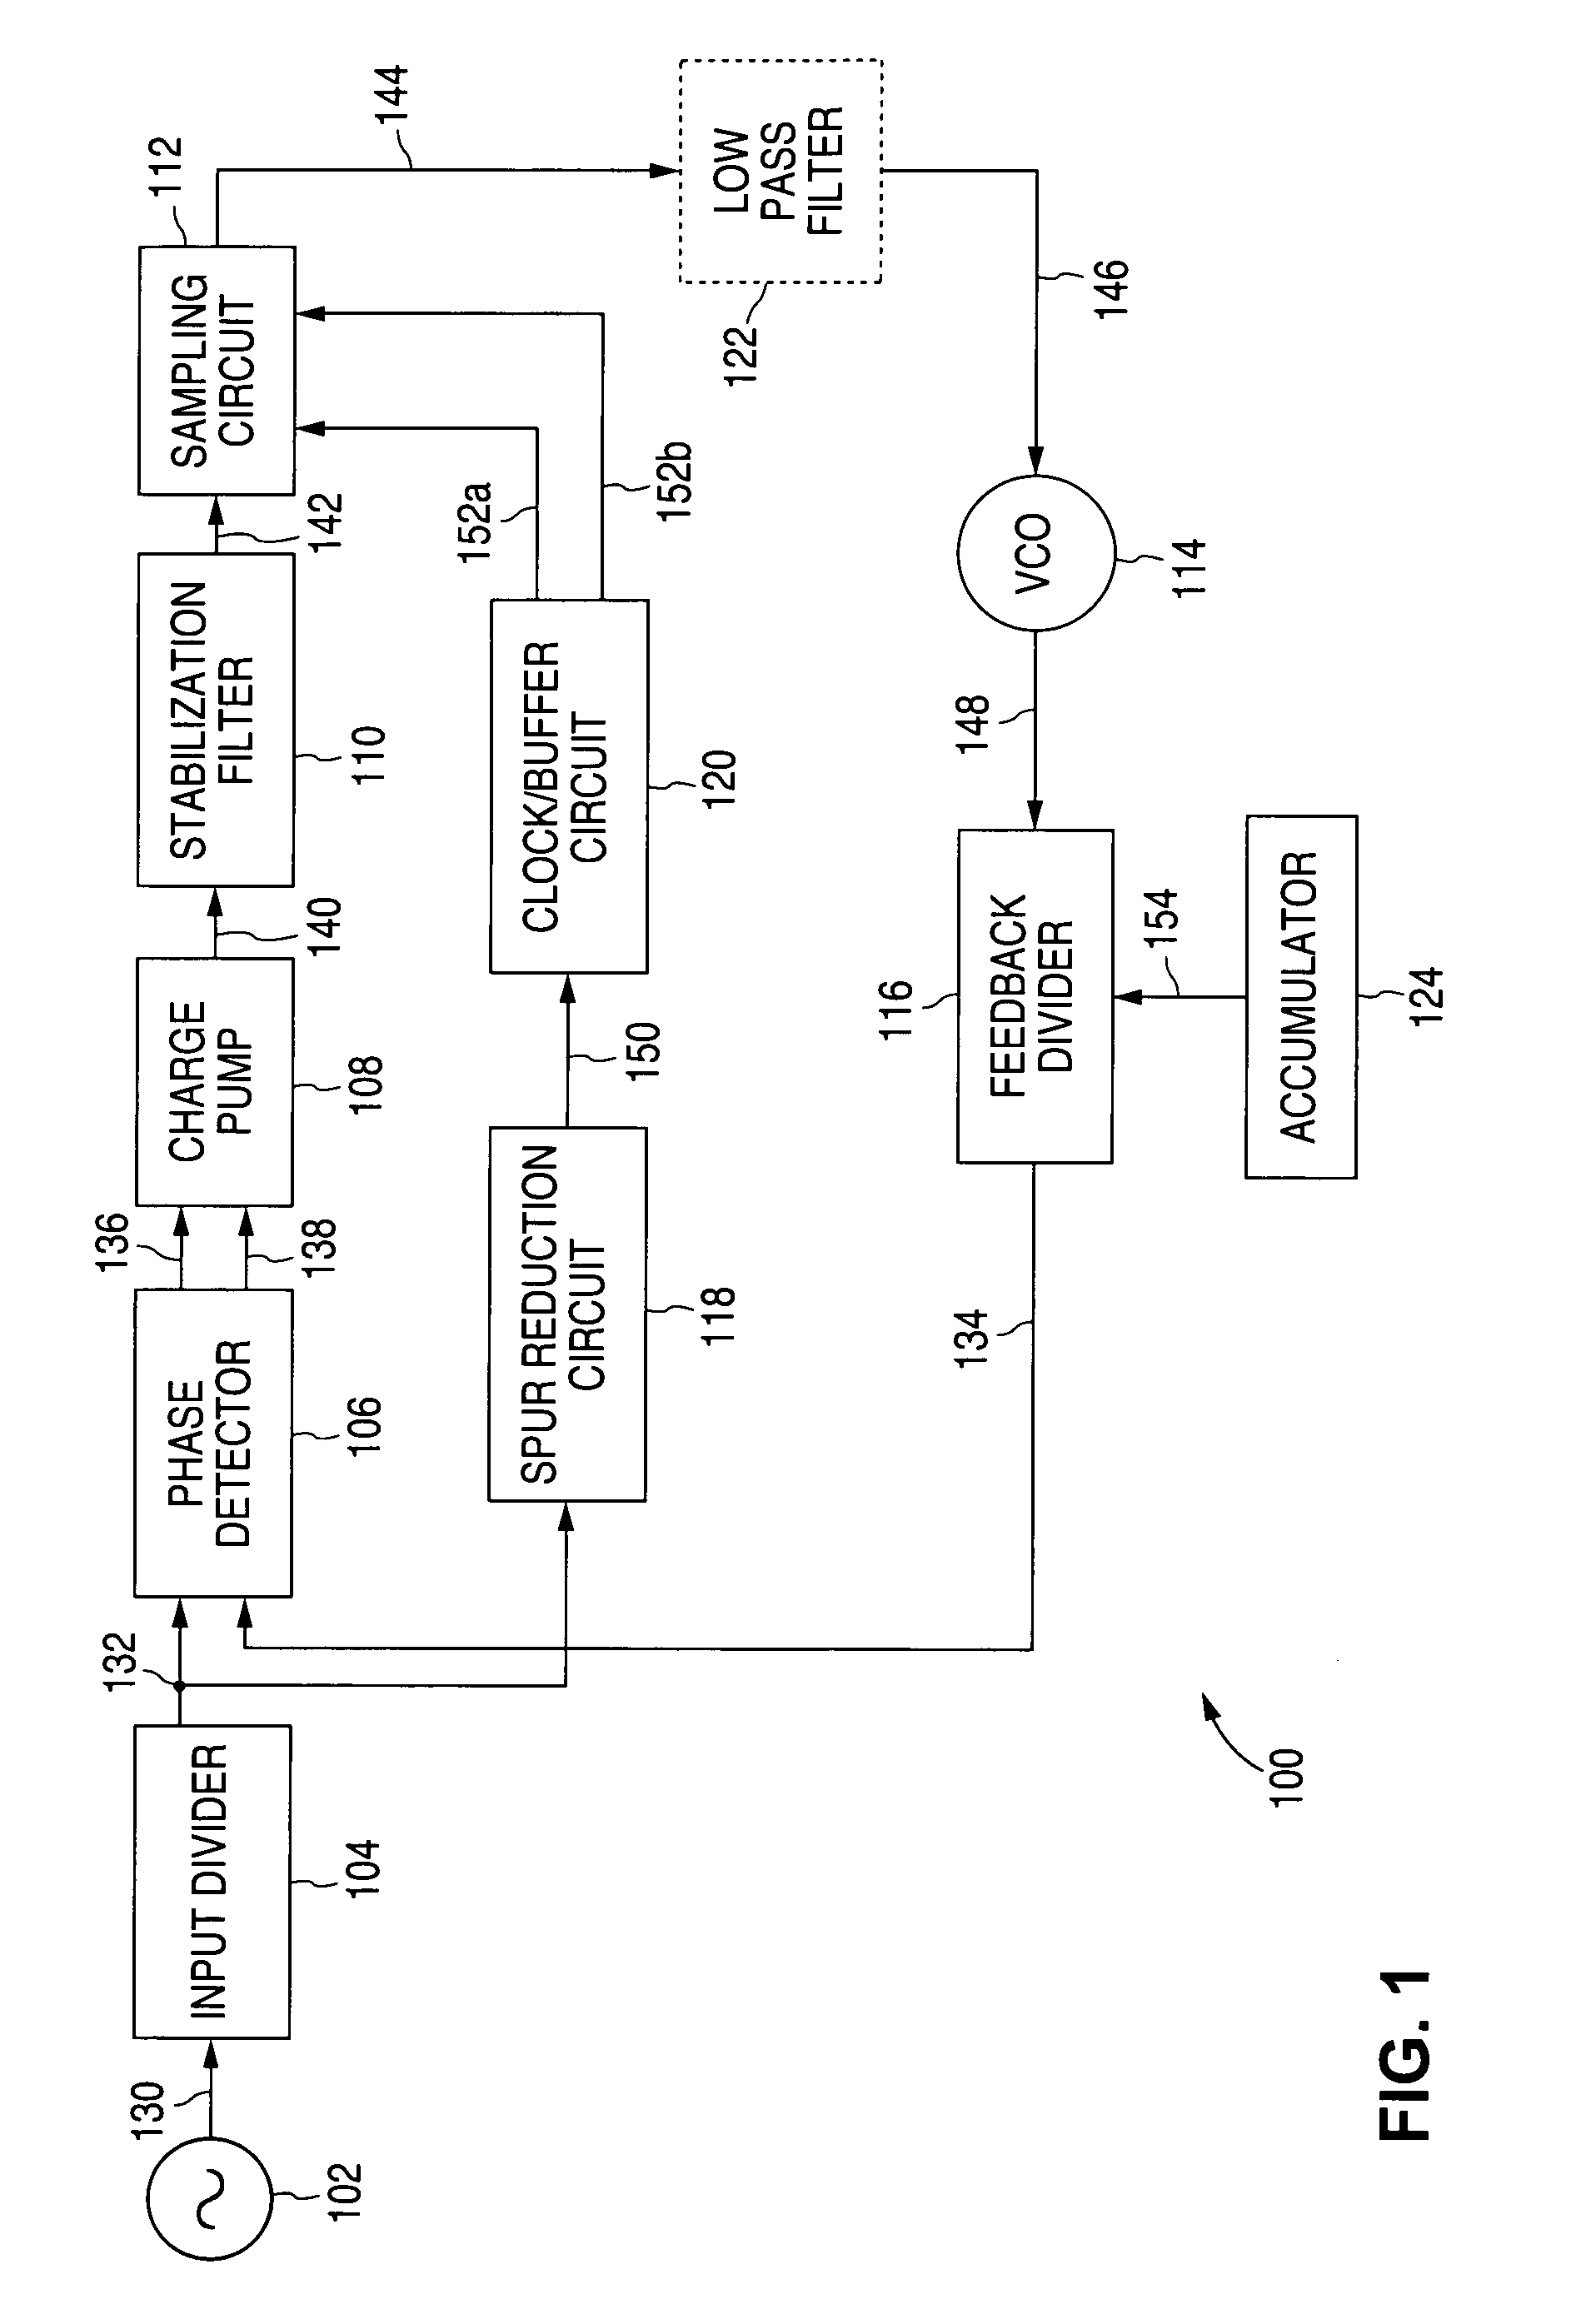 Method and system for providing a phase-locked loop with reduced spurious tones